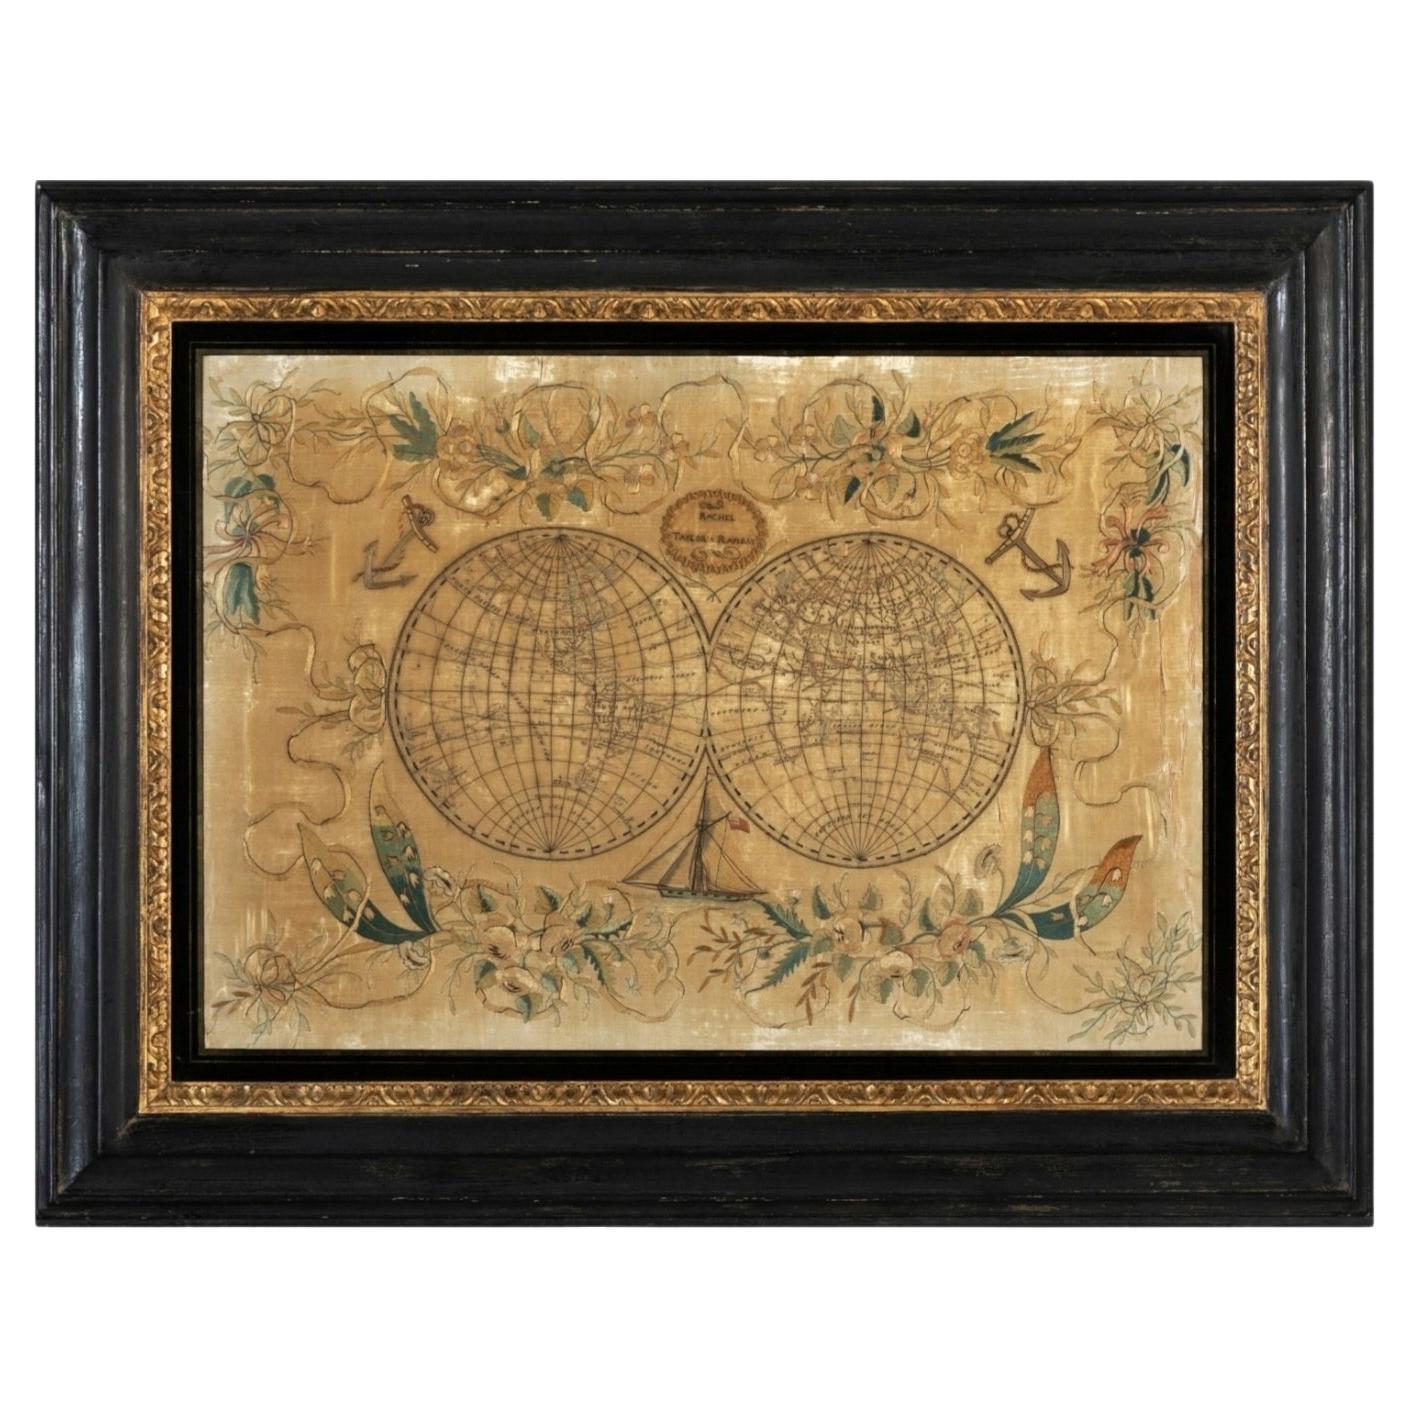 19th Century Embroidered Silk Panel Map Of The World